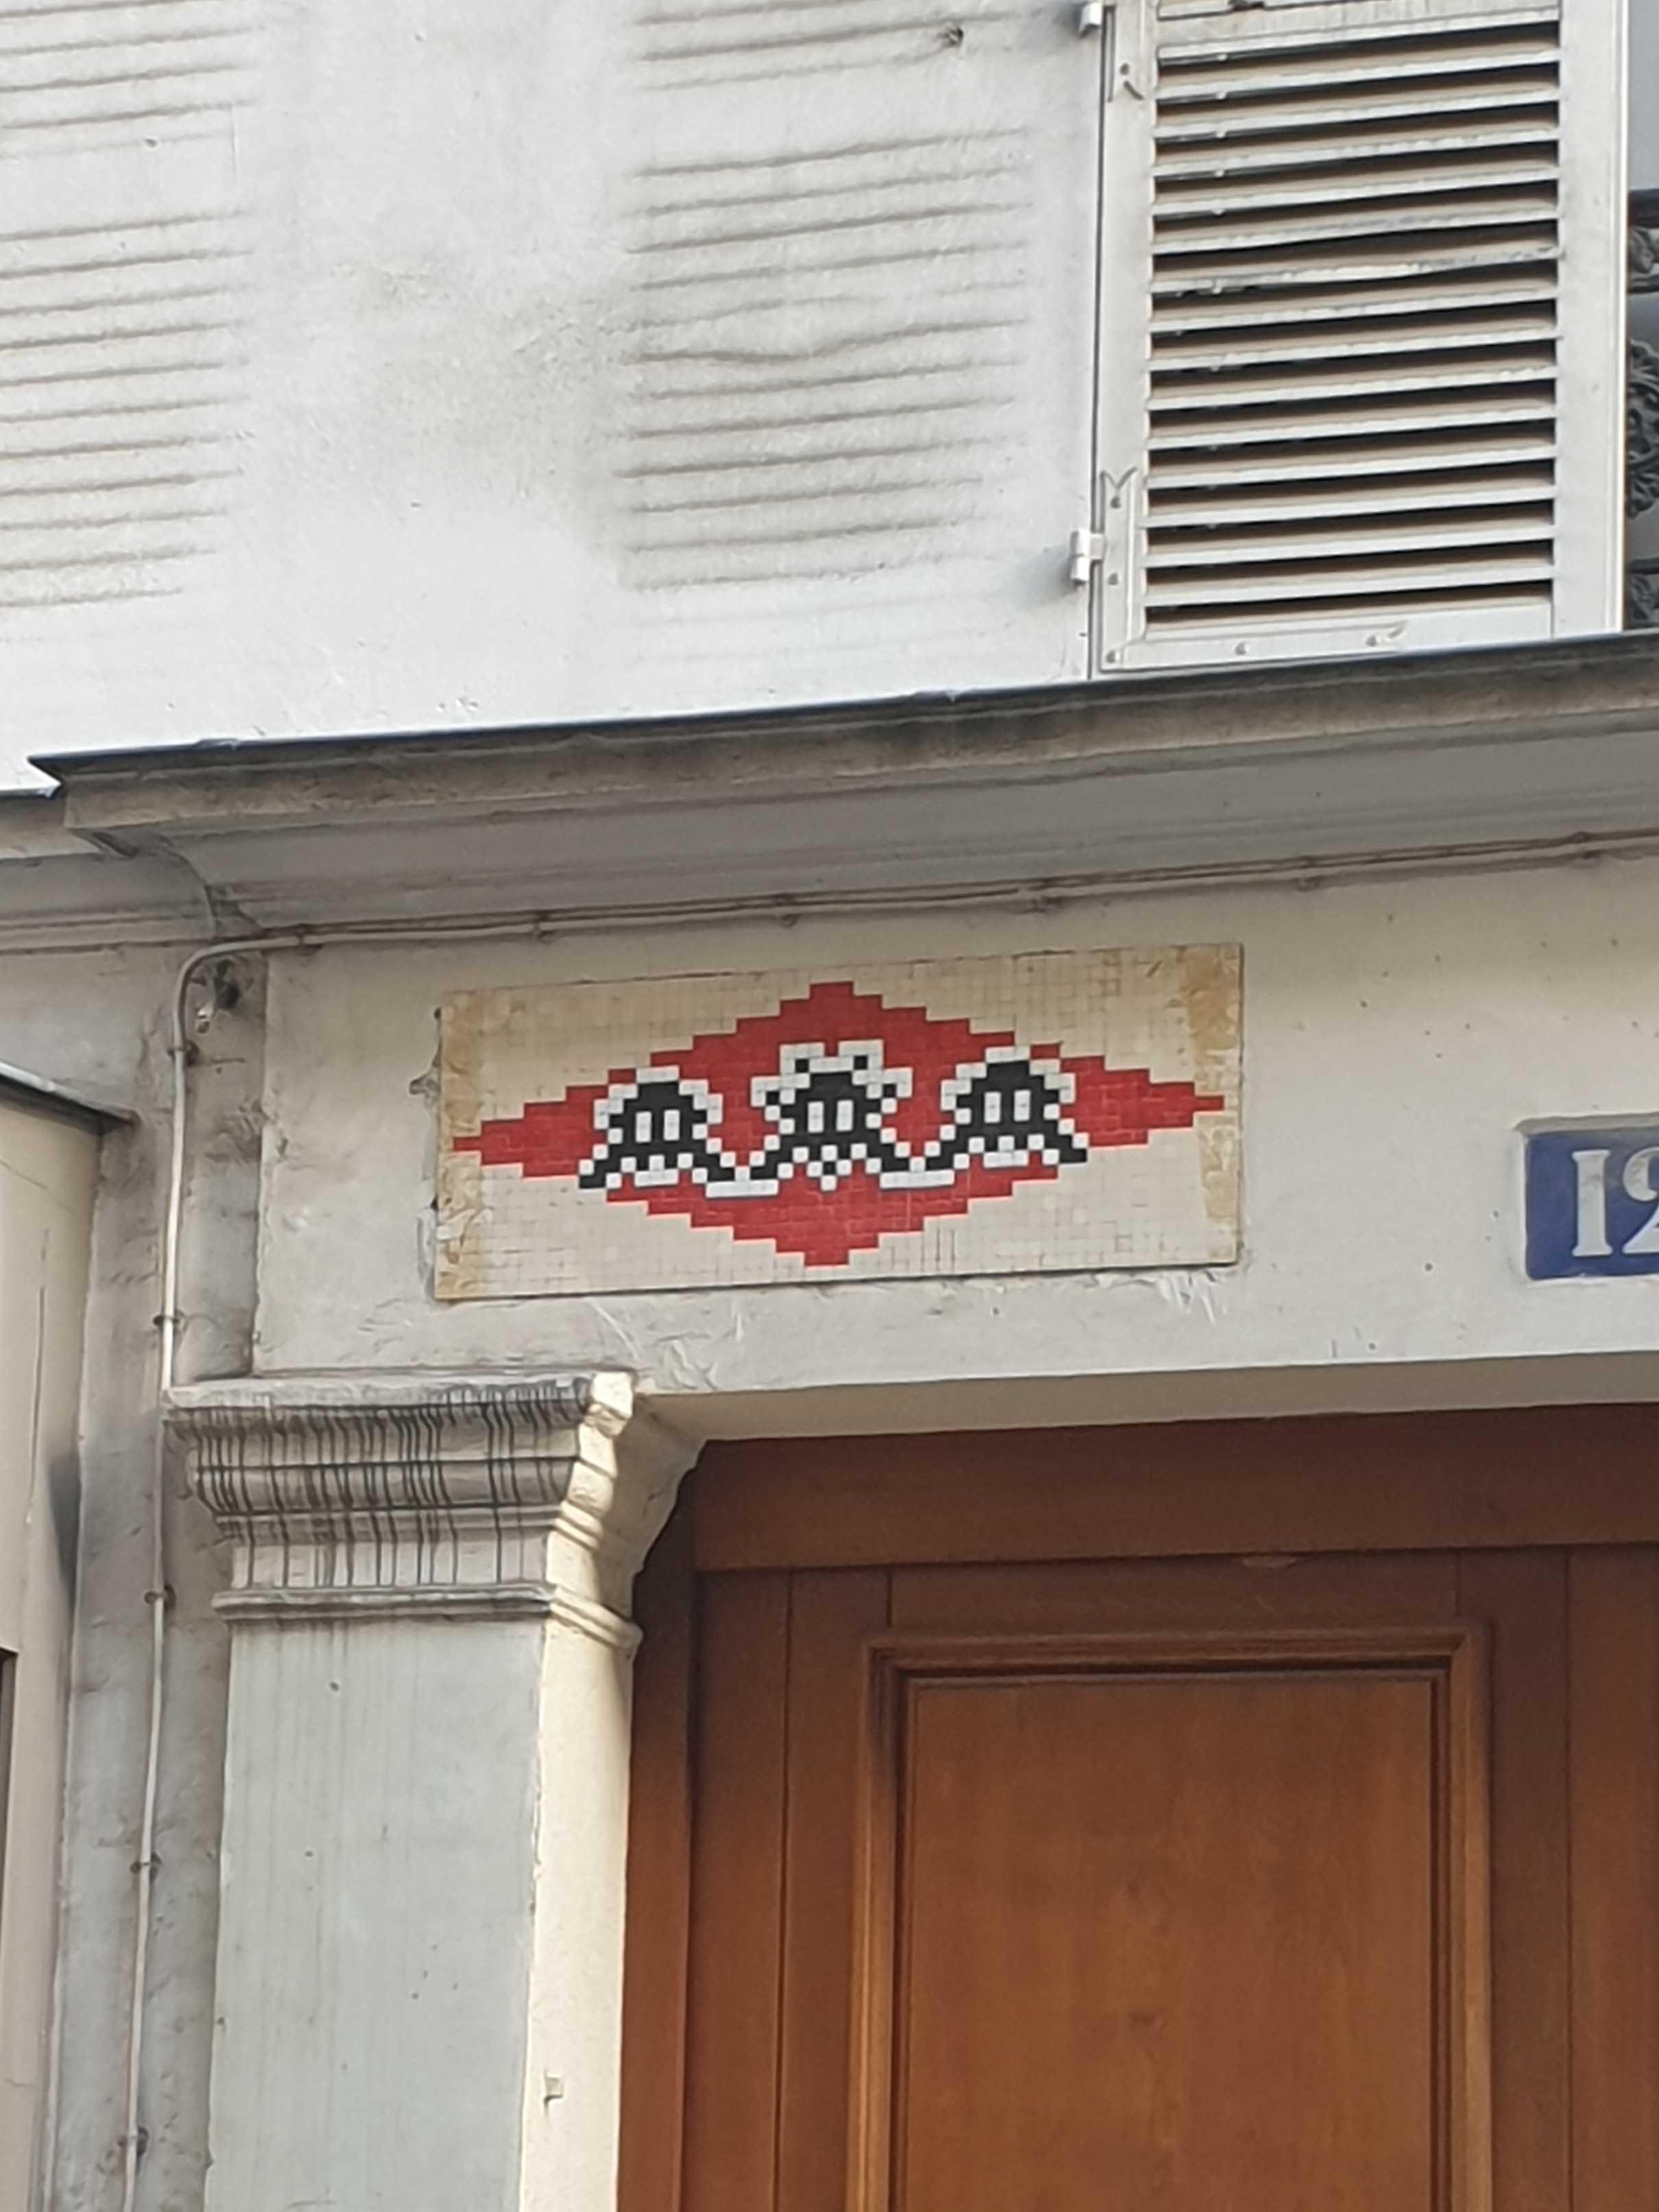 Mosaic 6006 Space Invader PA_0955 by the artist Invader captured by VinceBlaz in Paris France